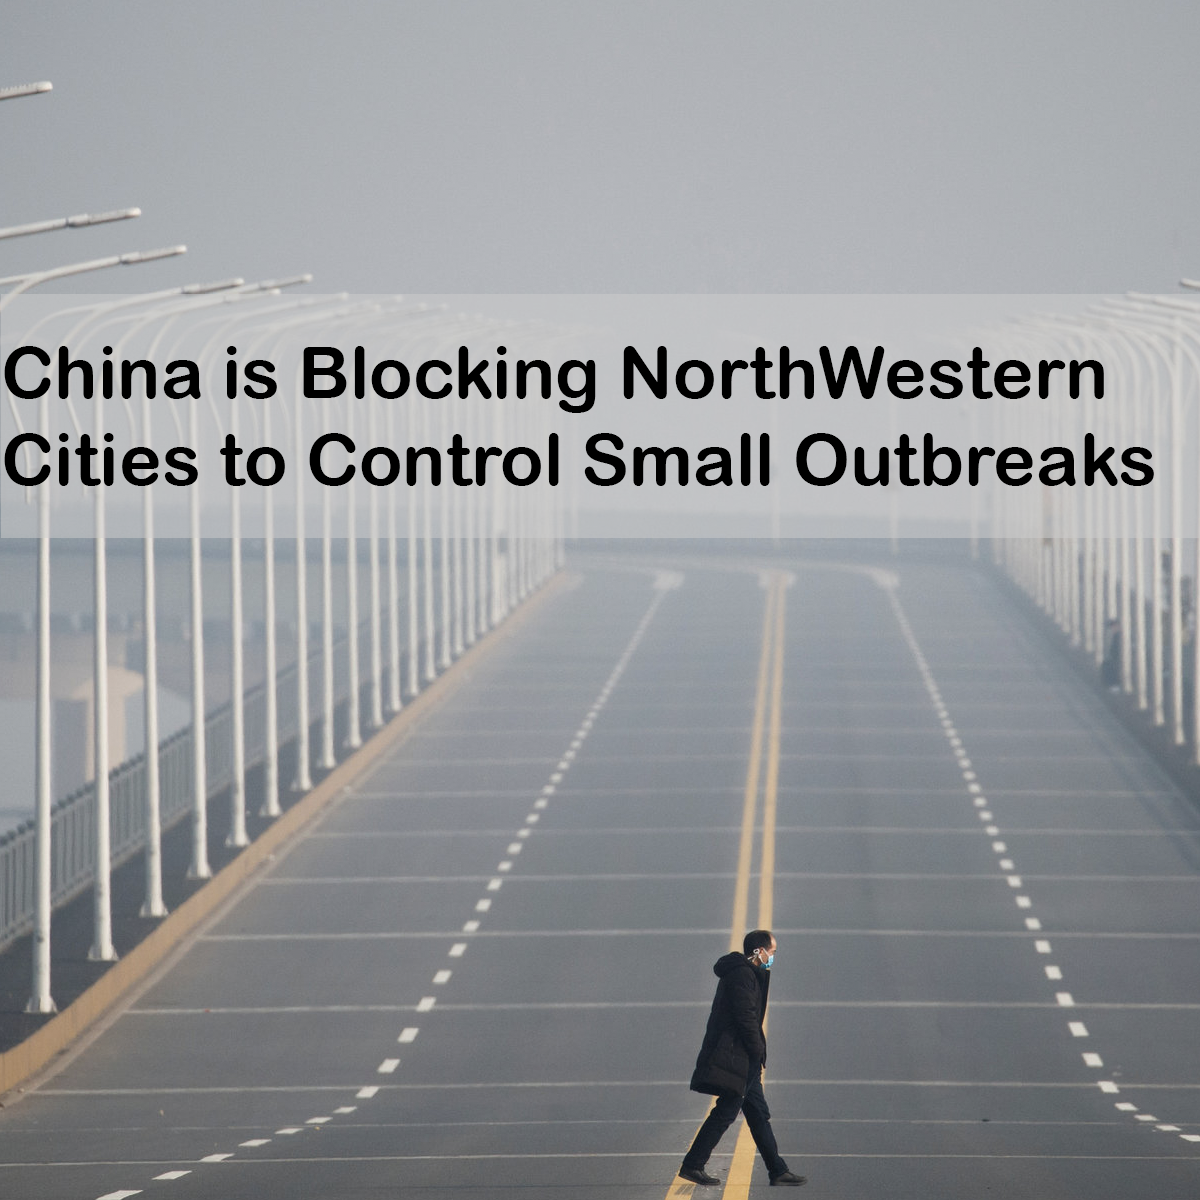 China is Blocking NorthWestern Cities to Control Small Outbreaks